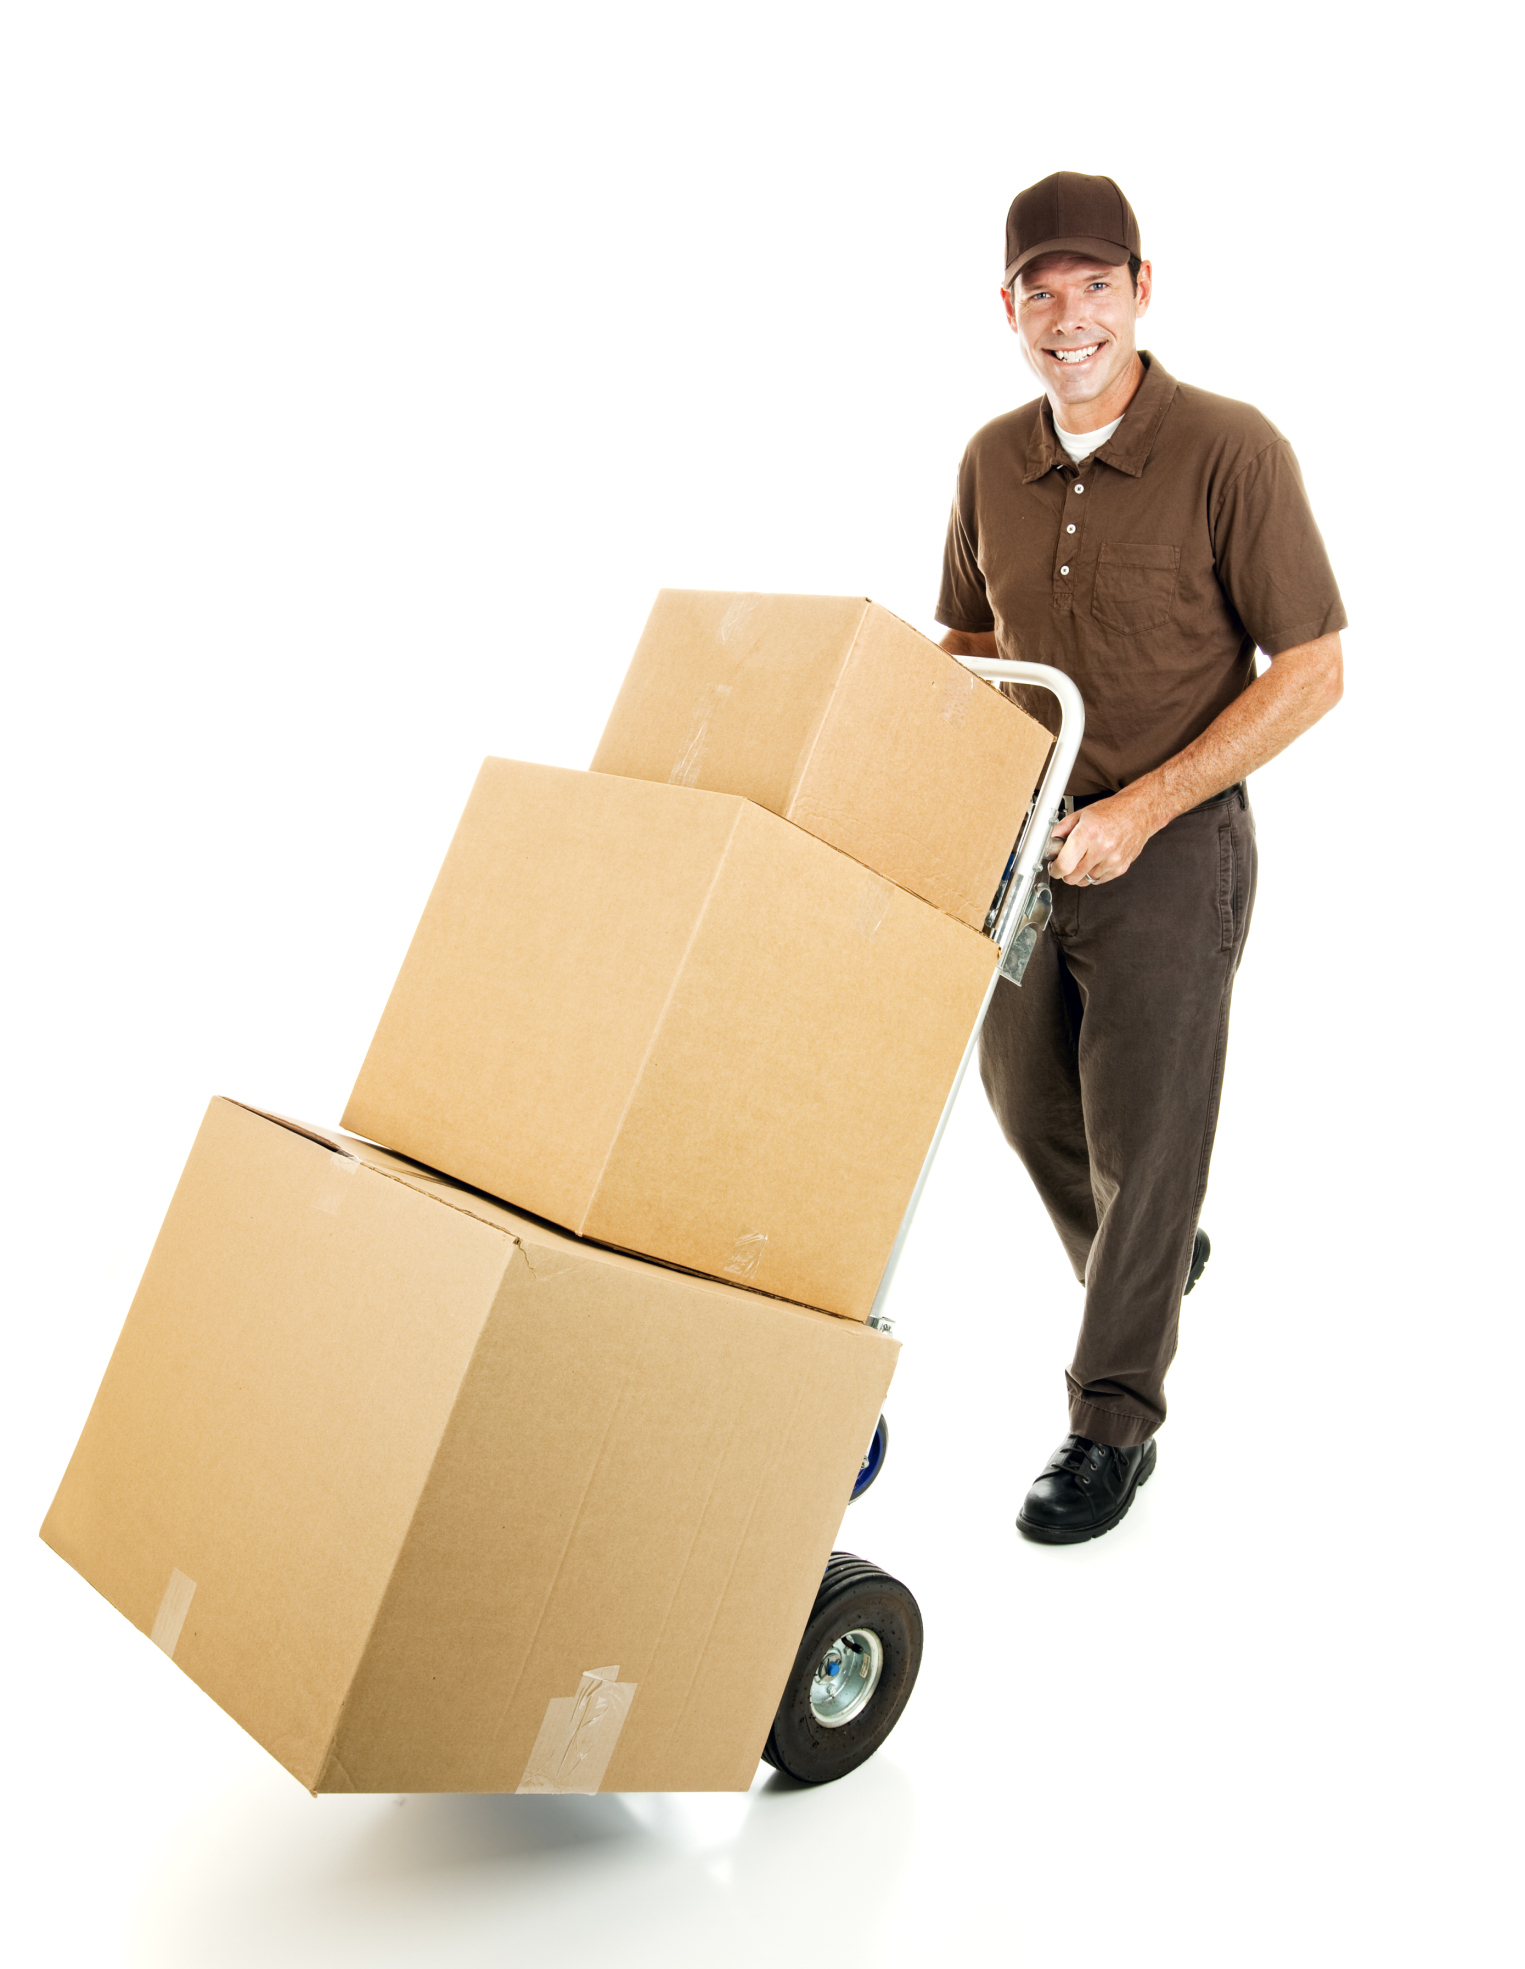 Office movers in Los Angeles